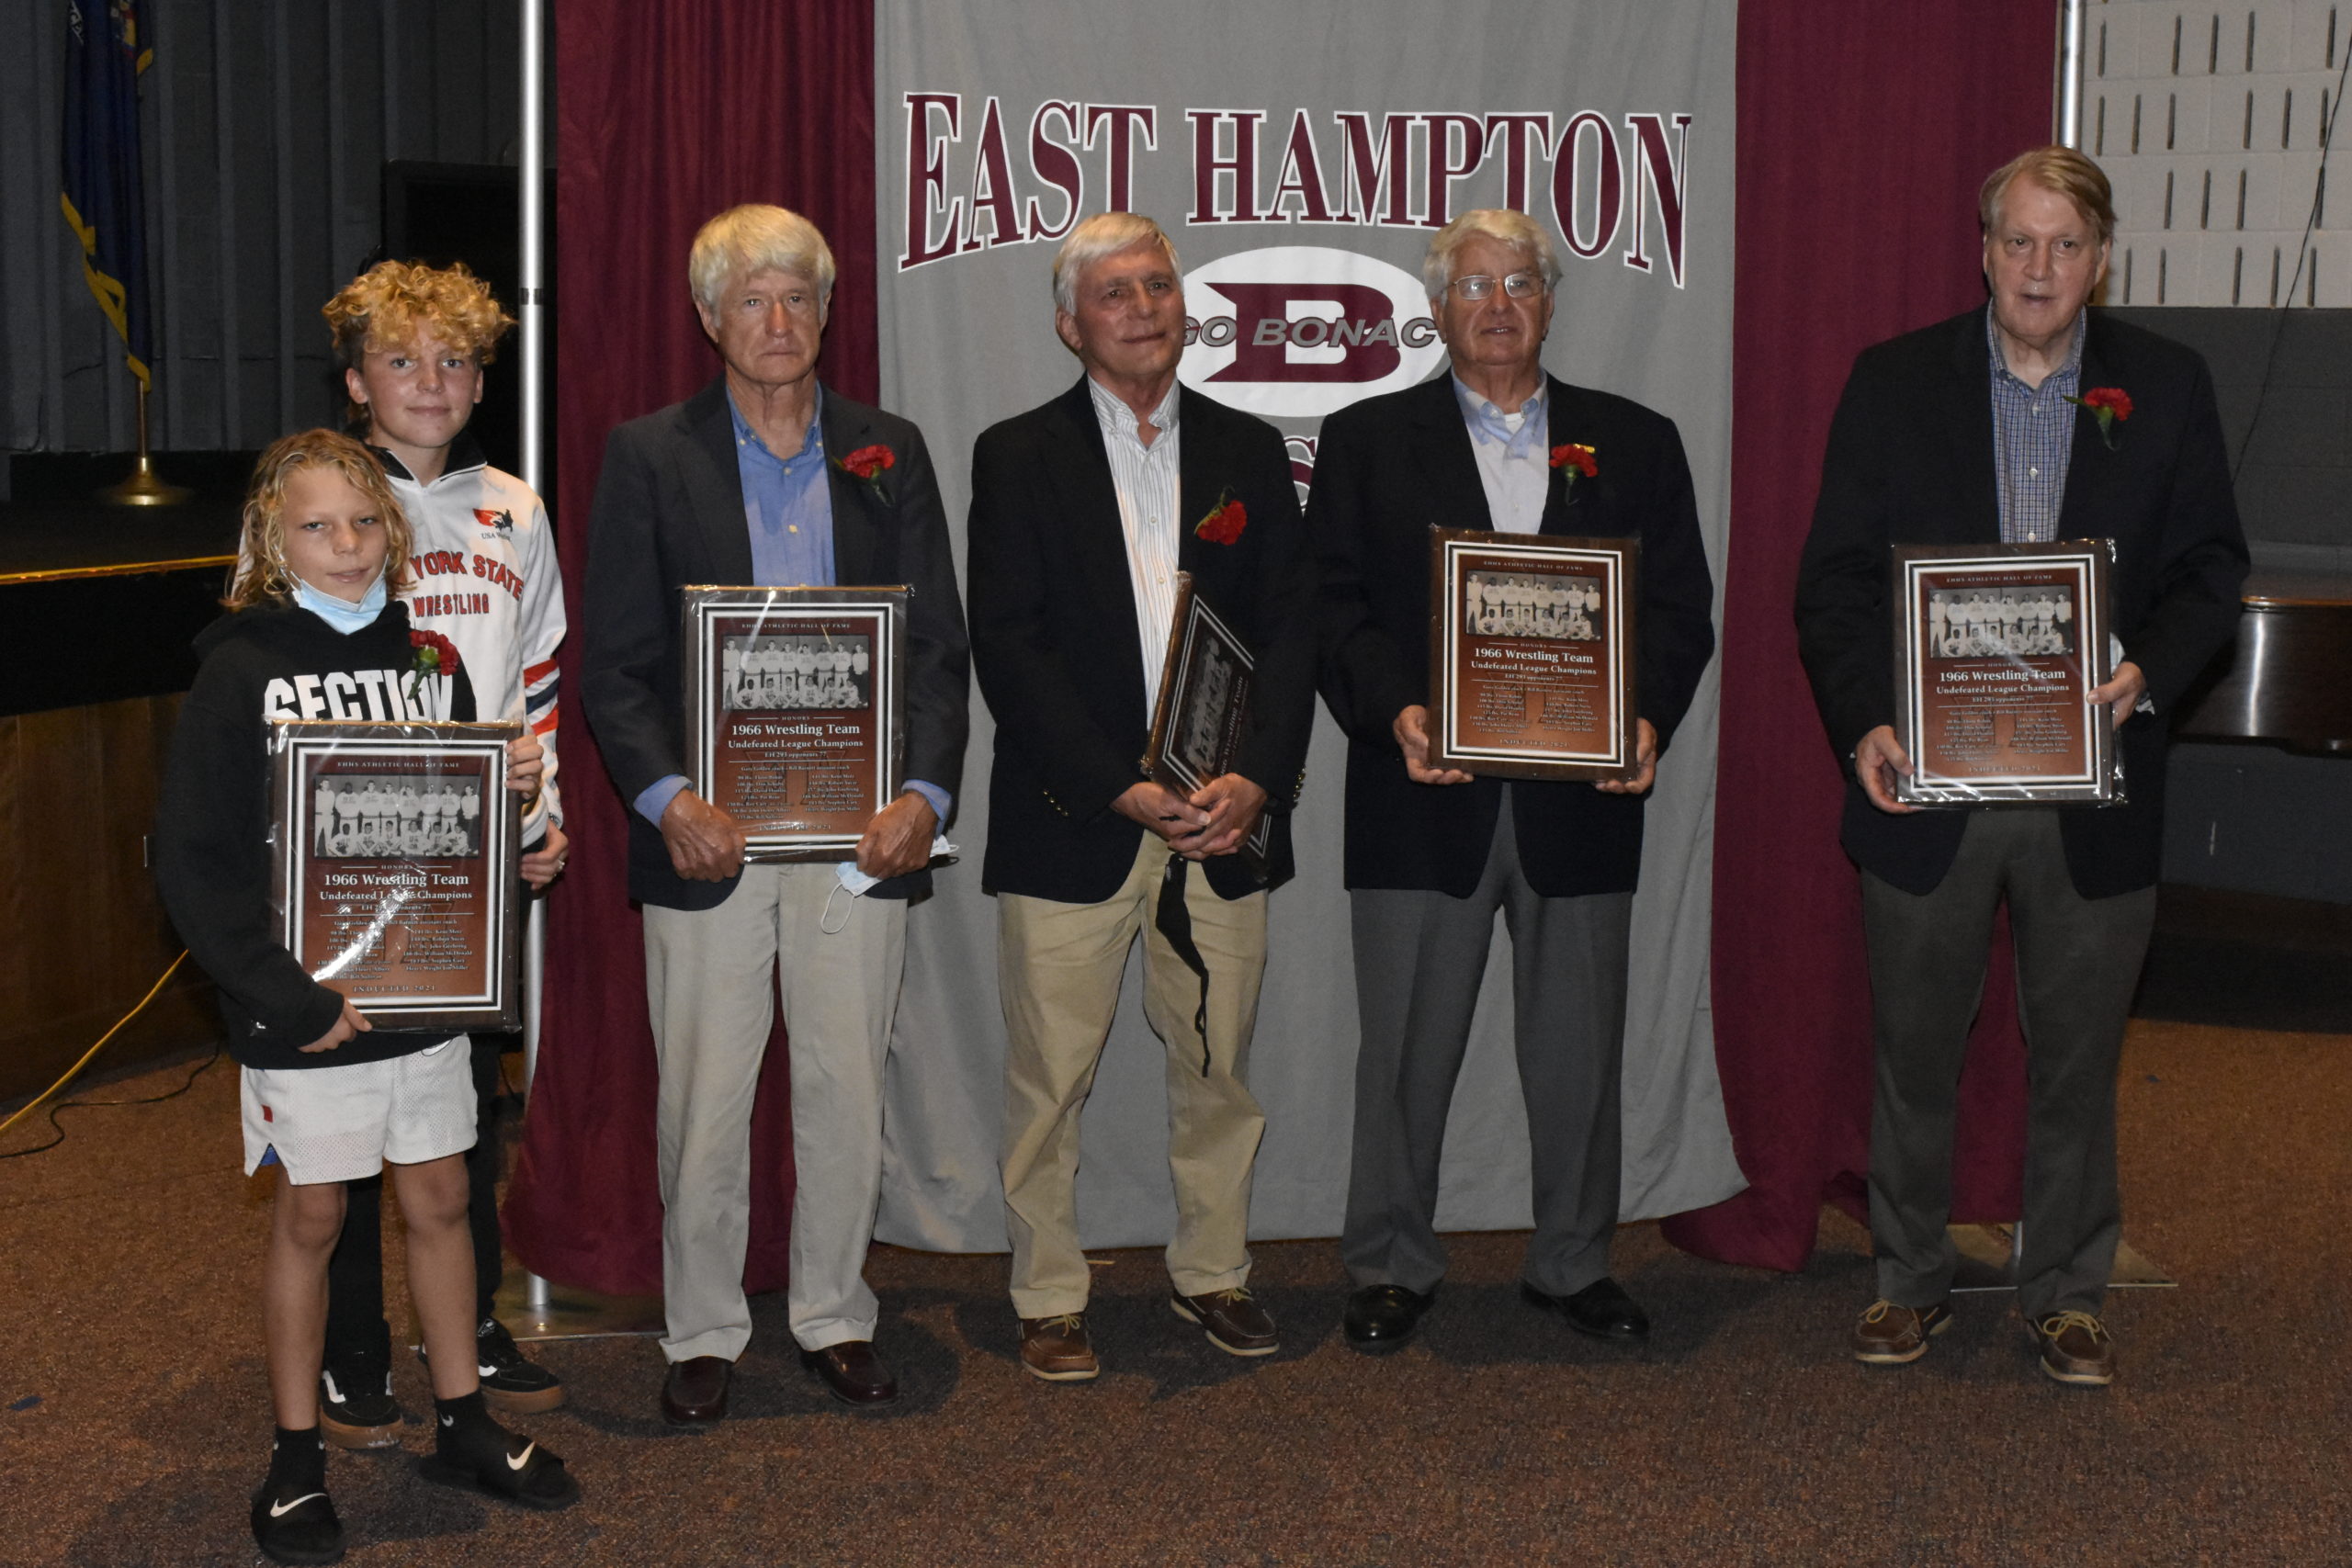 Members of the 1966 wrestling team which was inducted this past weekend.